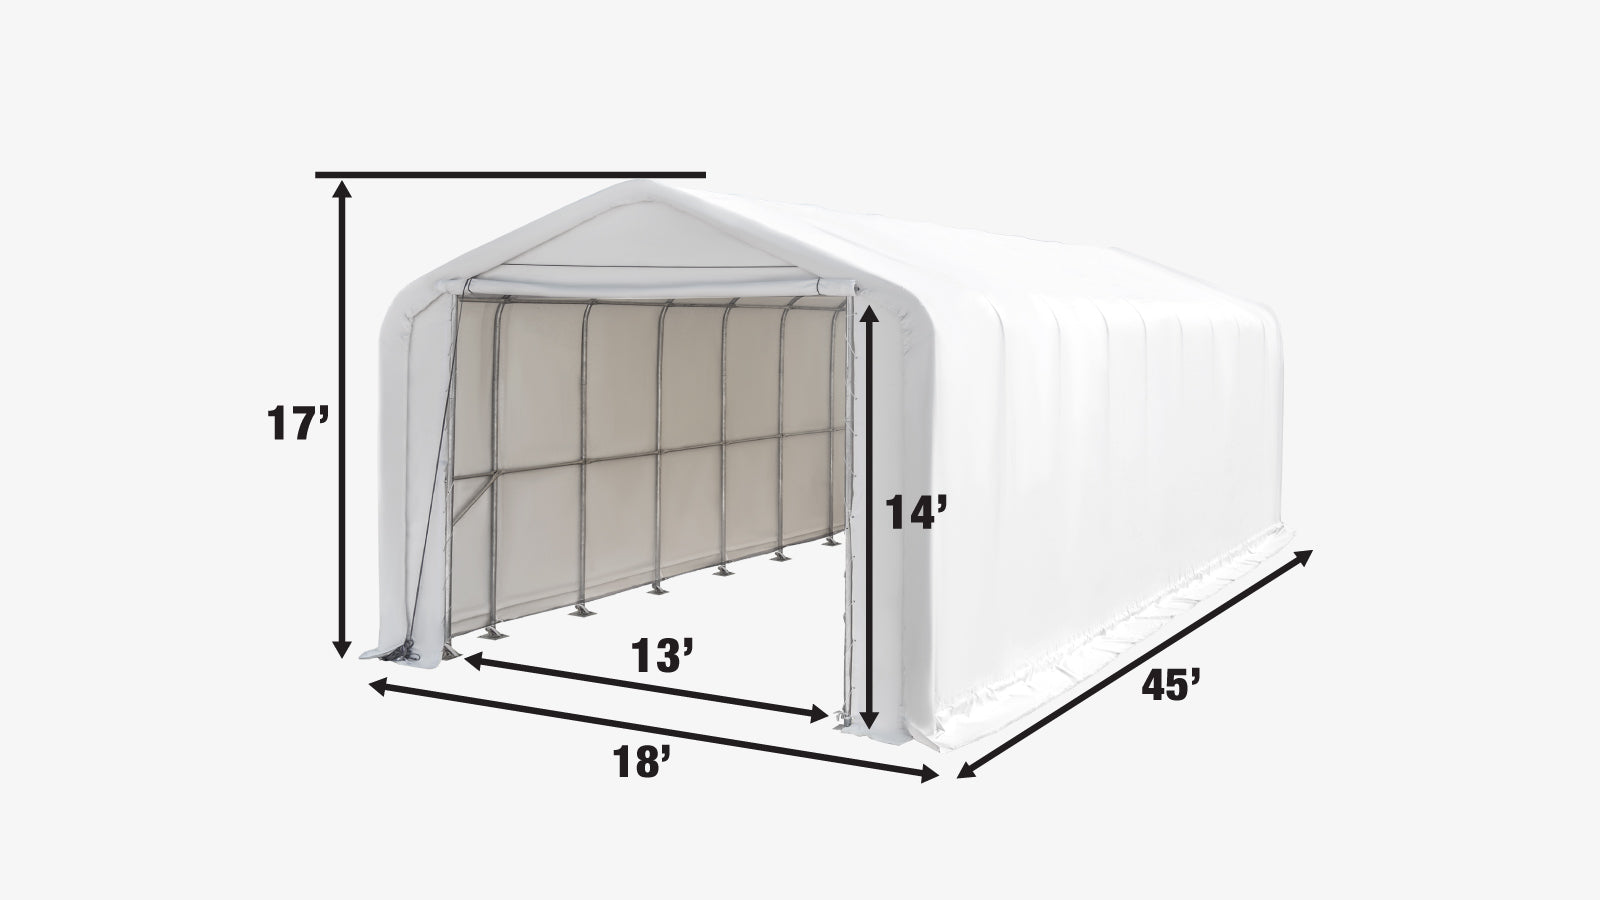 TMG Industrial 18’ x 45’ RV/Motorhome Storage Shelter, 17 oz PVC Fabric Cover, Front Roll-Up Door, Enclosed Rear Wall, 3-Layer Galvanized Steel Frame, 13’ Straight Sidewalls, TMG-ST1845-specifications-image